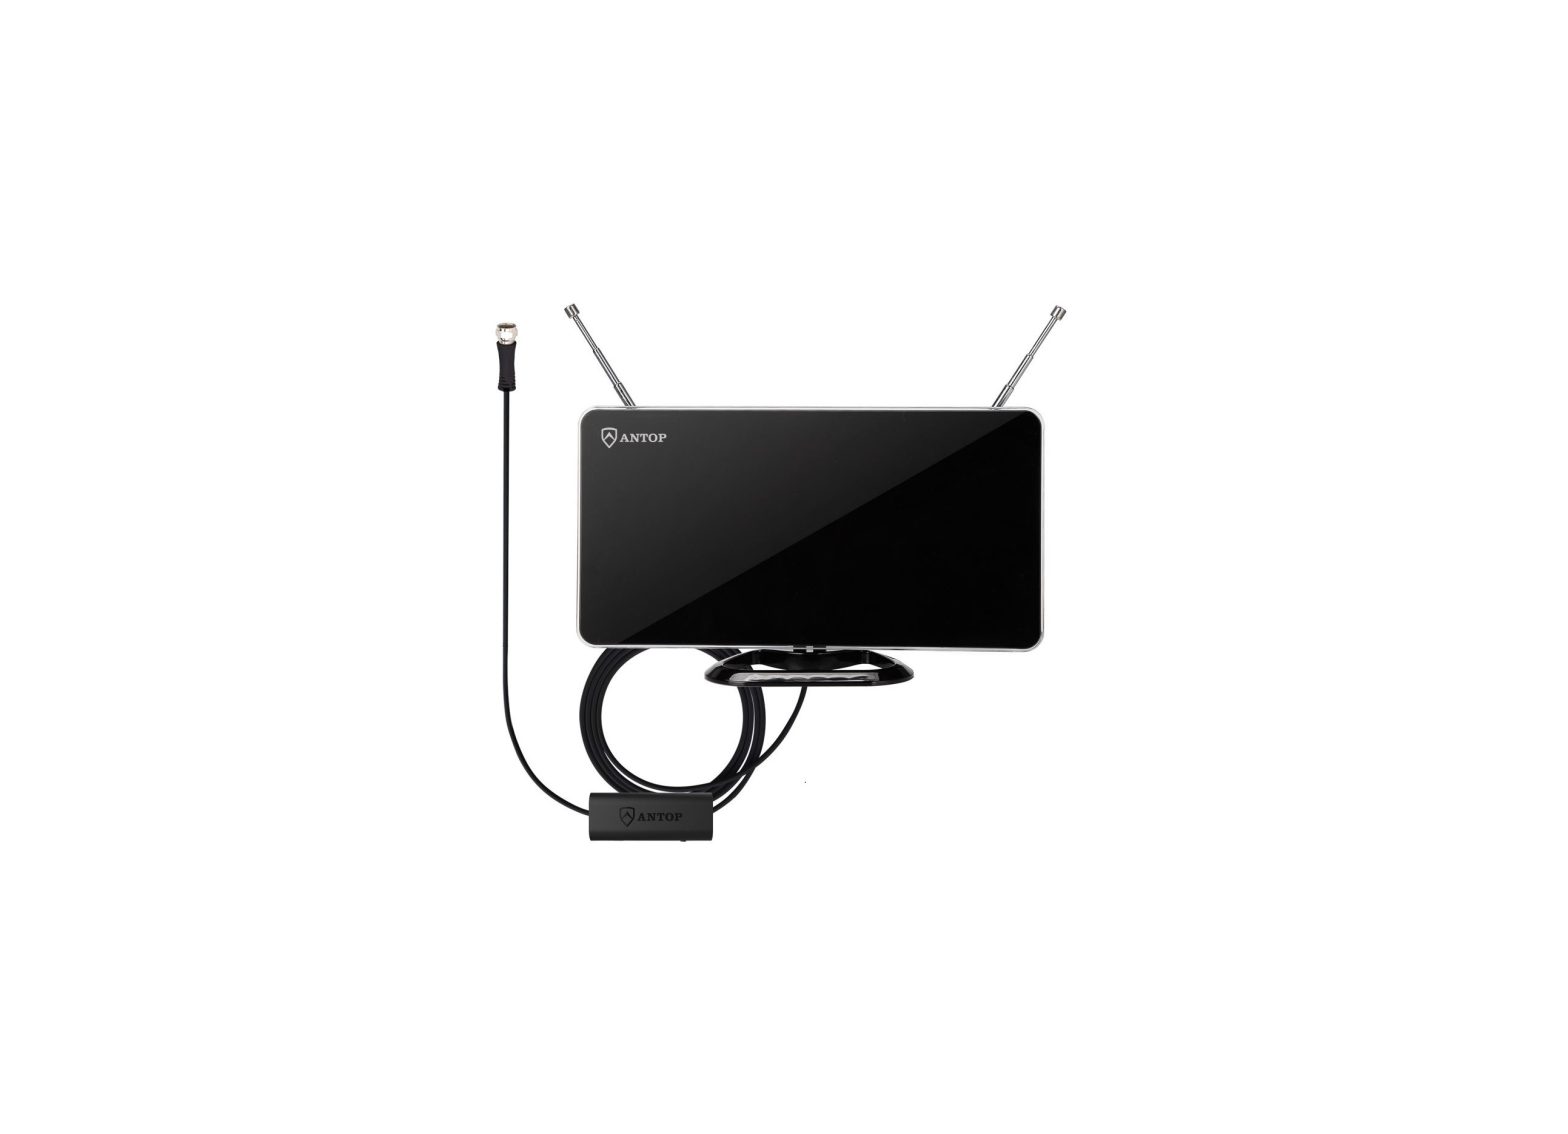 ANTOP AT-211B Curved Panel Indoor TV Antenna with Smartpass Amplifier and LTE Filter User Manual